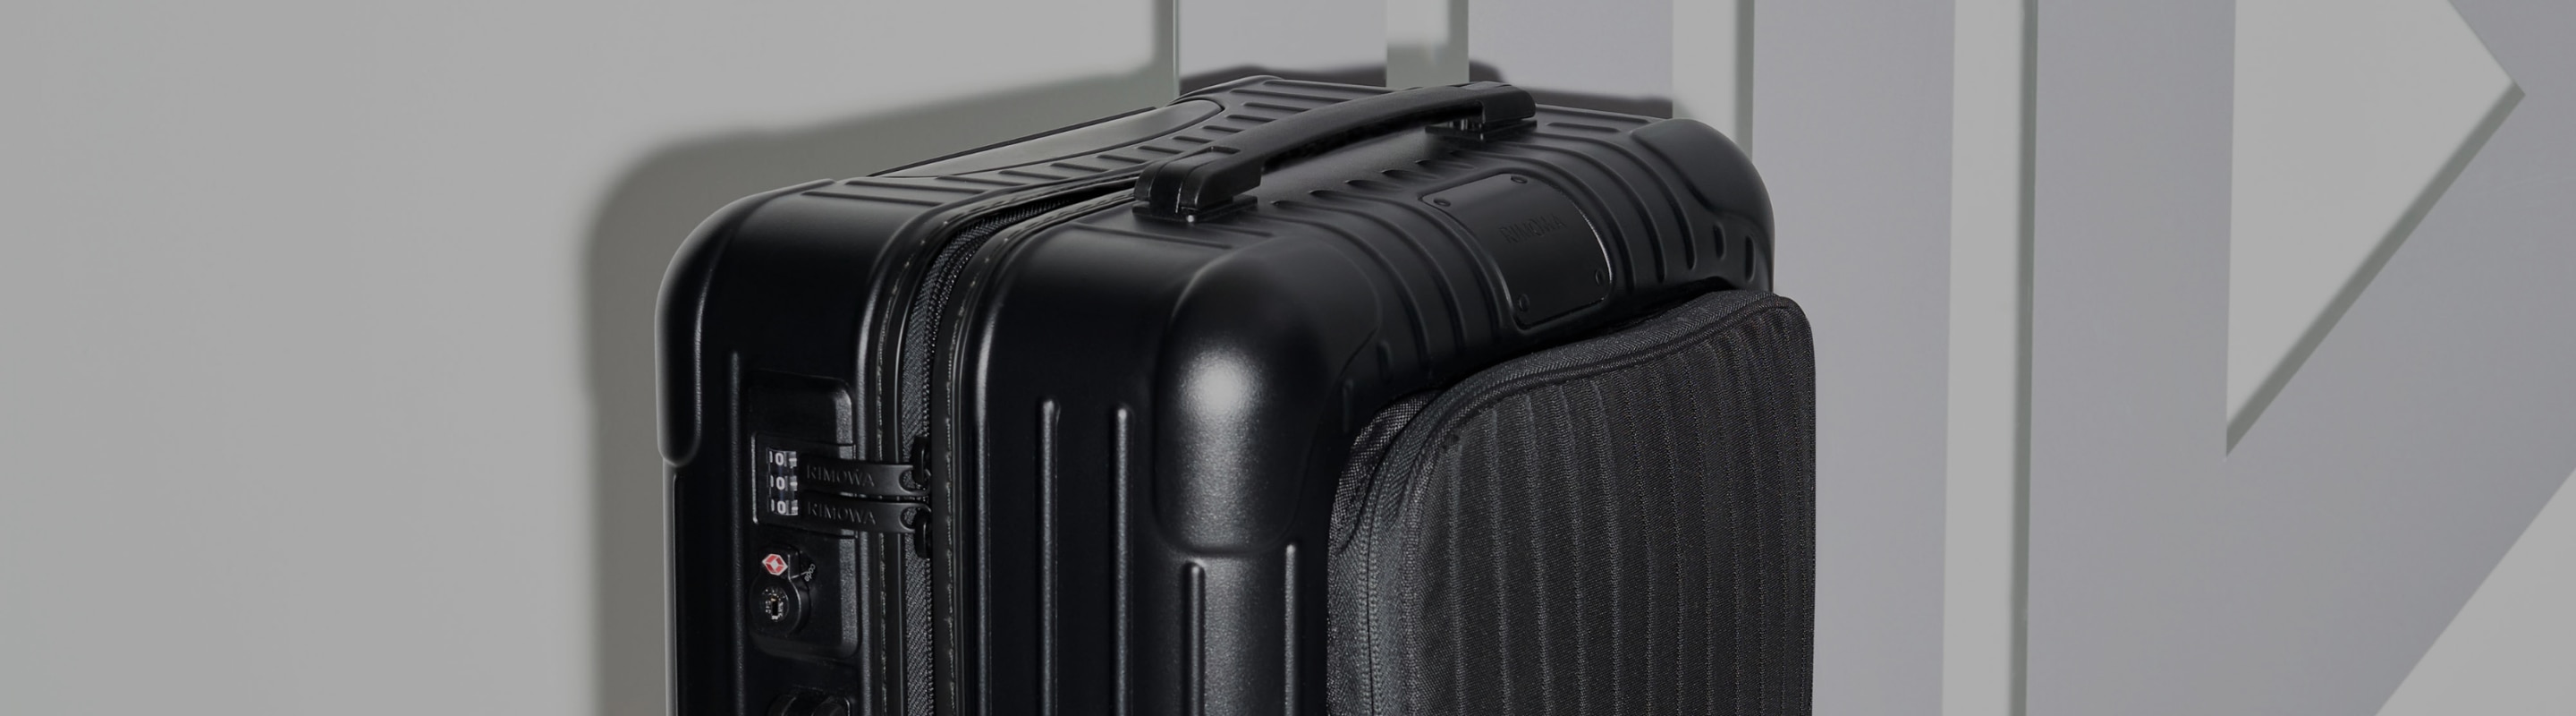 RIMOWA Essential Sleeve: Polycarbonate suitcases with 4 wheels 